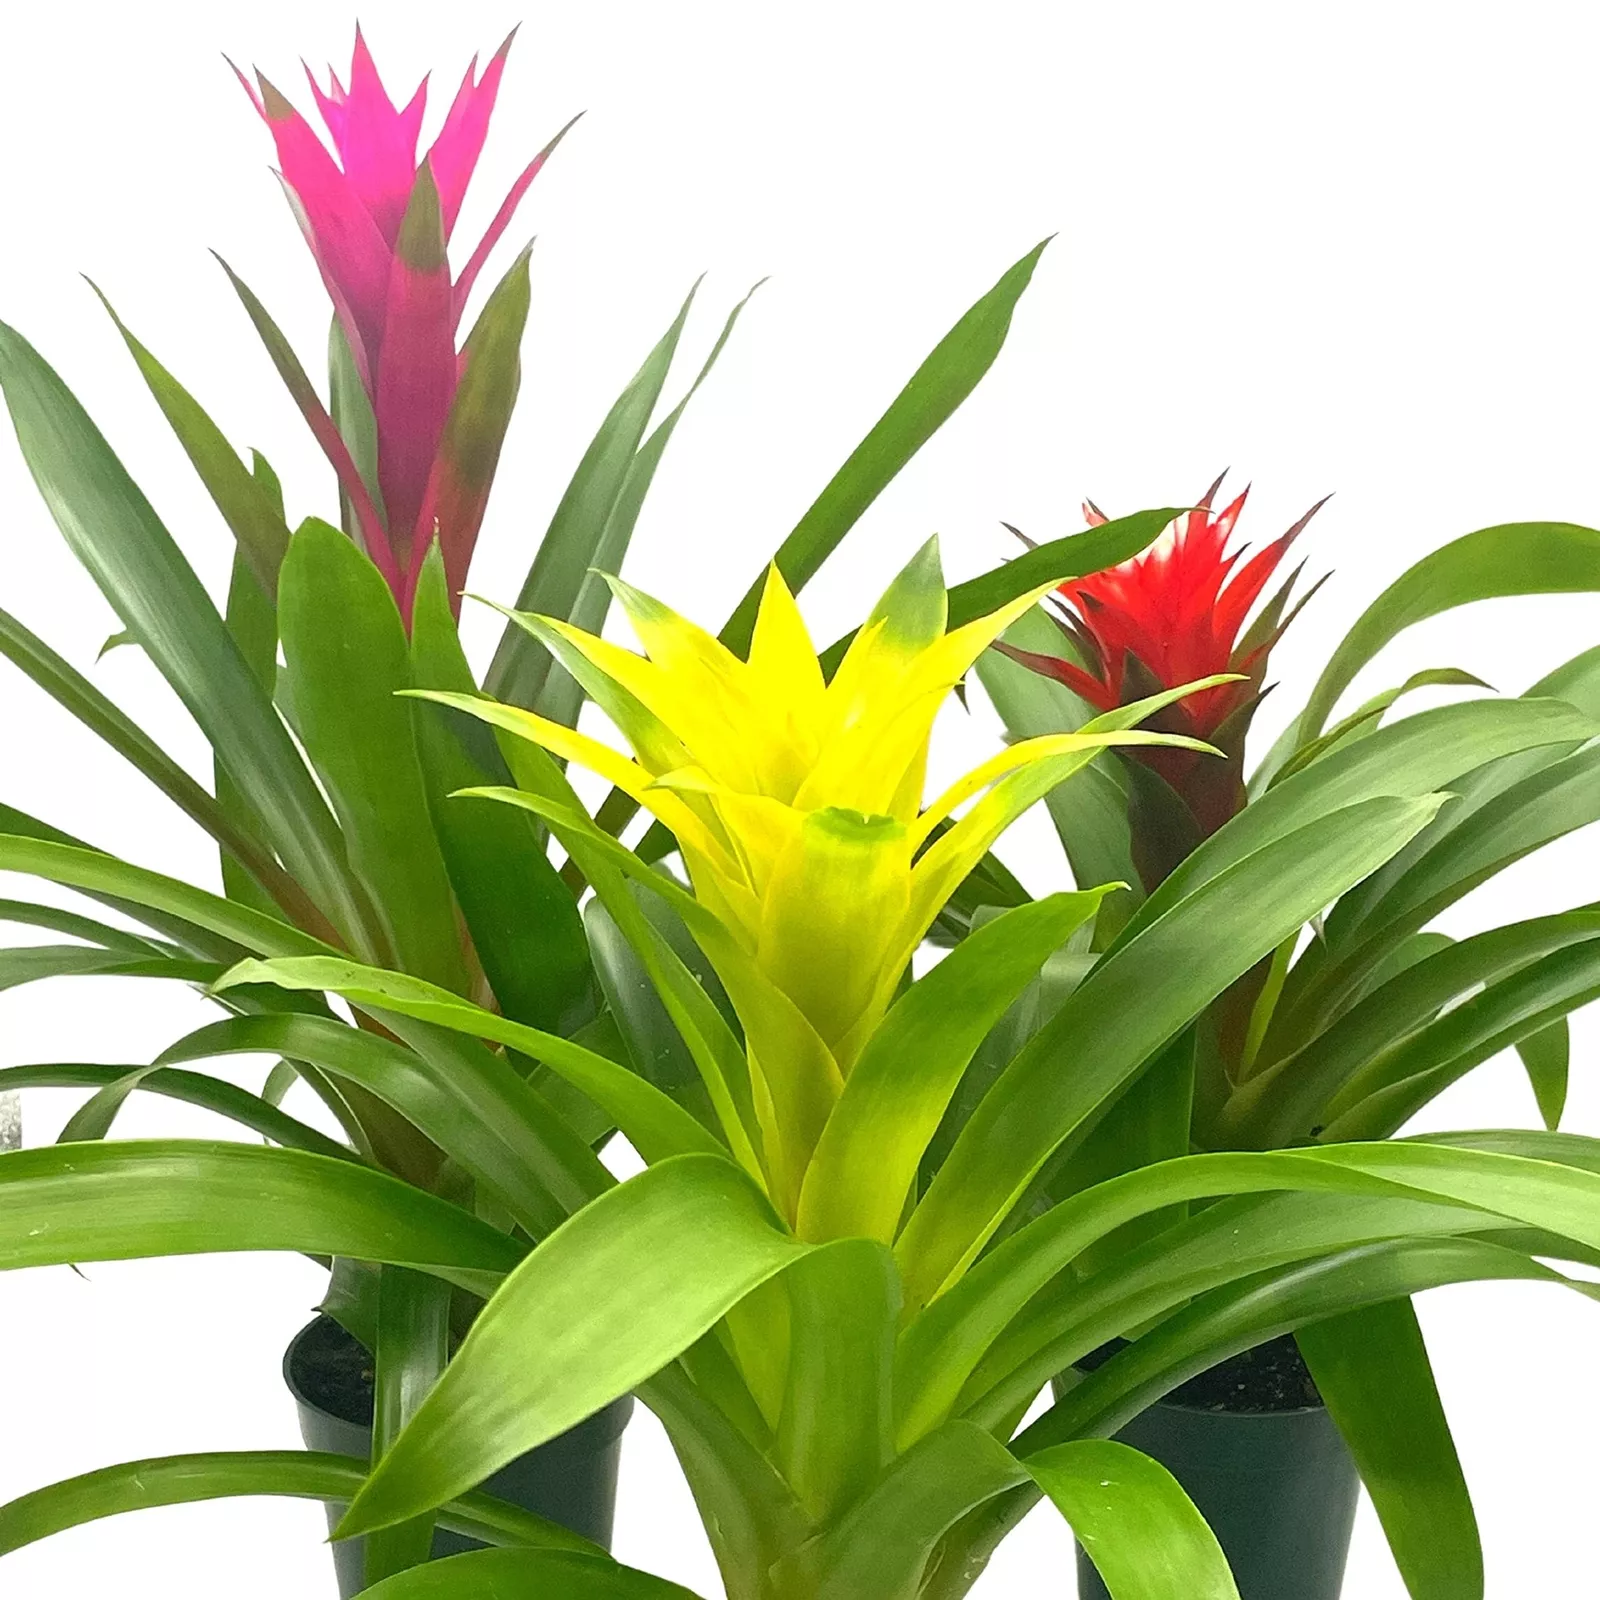 Colorful Bromeliad Assortment 4 in Set of 3 Guzmania Variety - $80.71